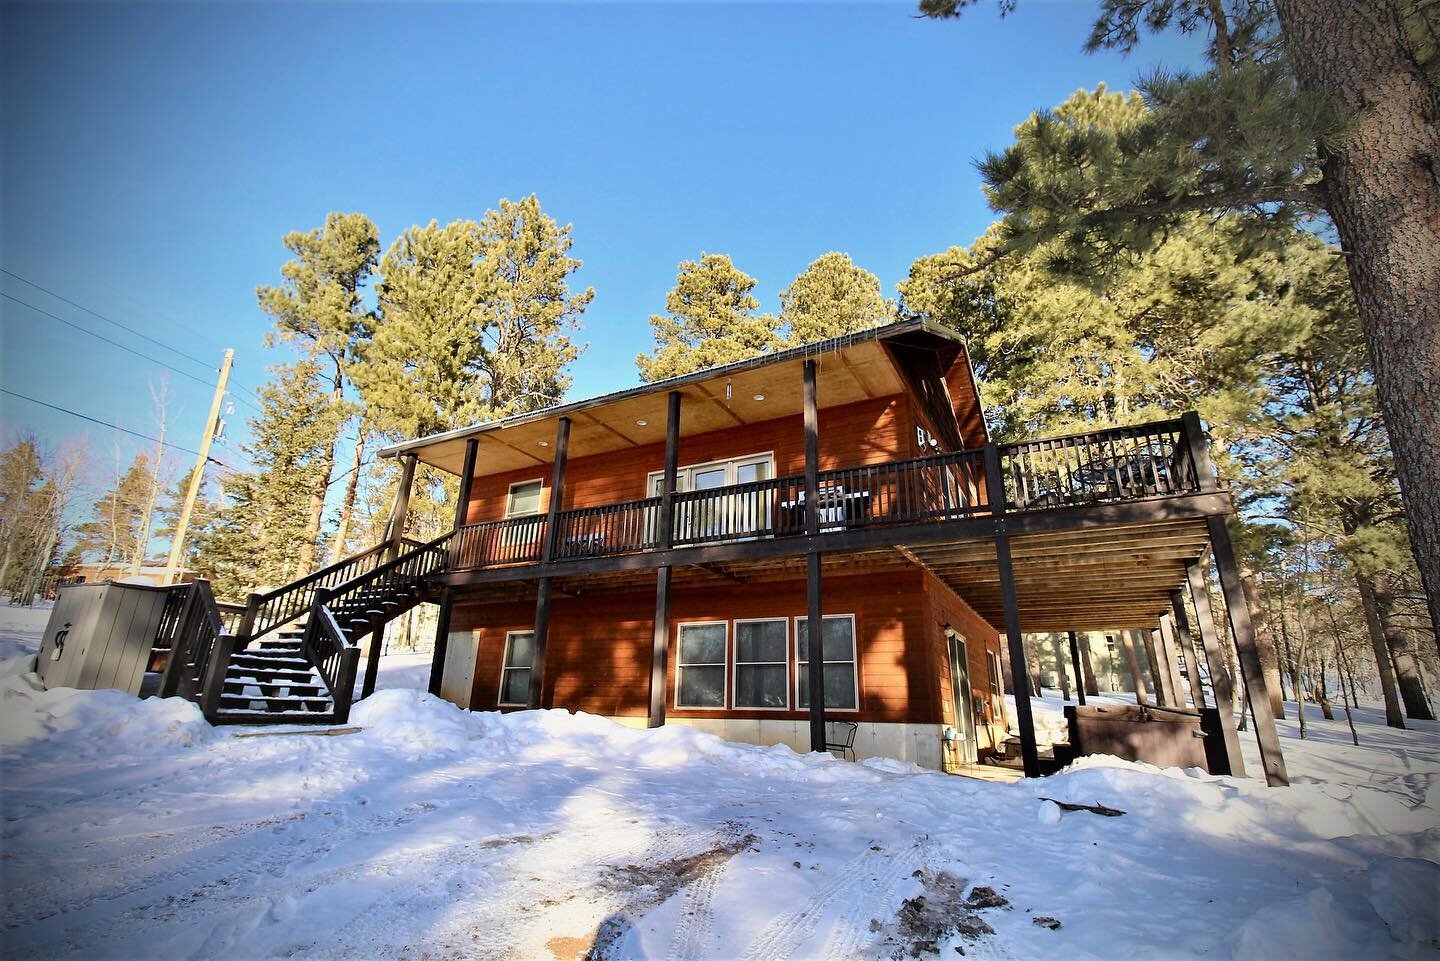 Check out Cinnamon Bear Cabin. Available for rent through stayhospitium.com #TerryPeak #BlackHillsCabins